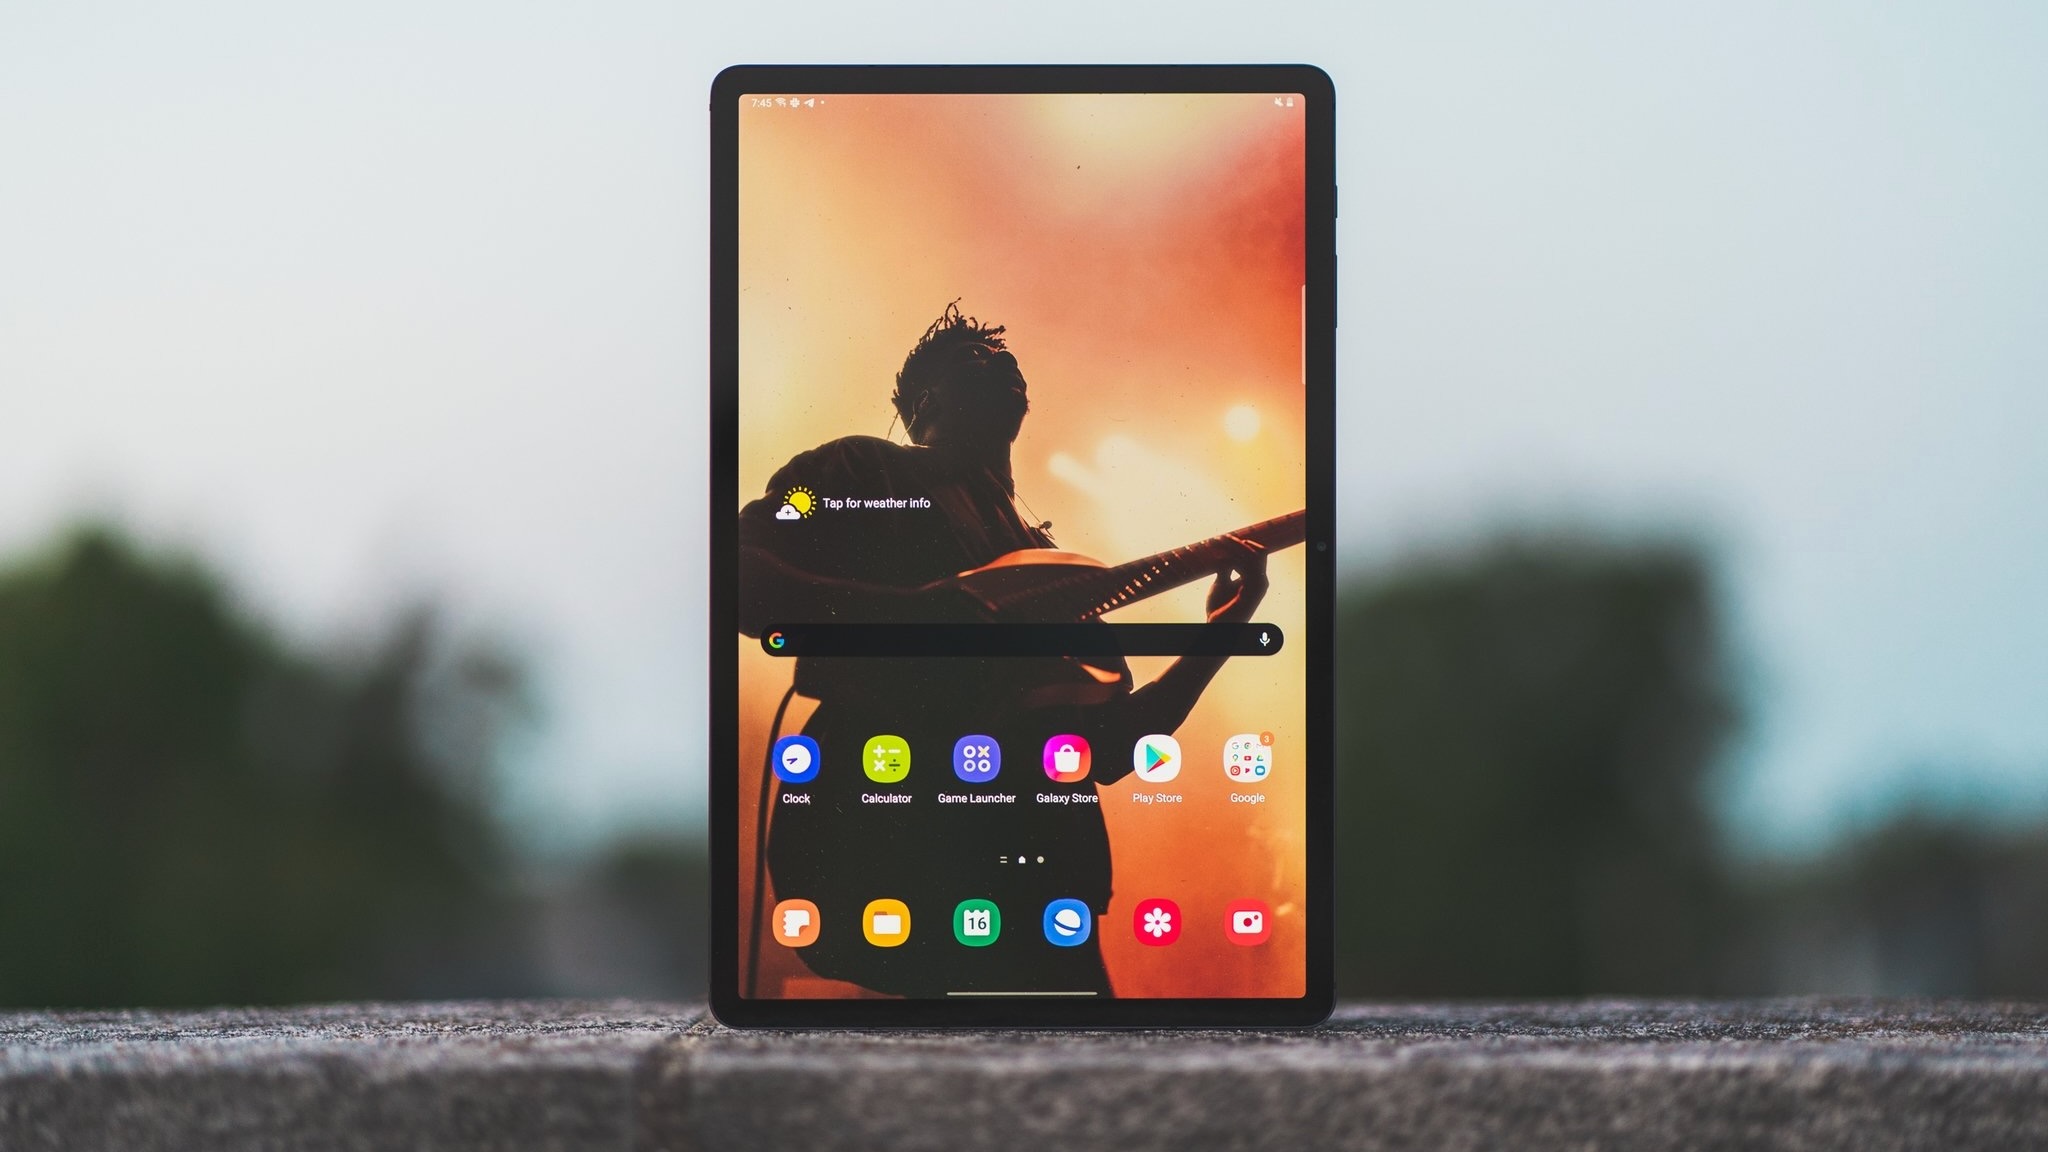 Samsung Galaxy Tab S7 Plus is displayed in portrait mode